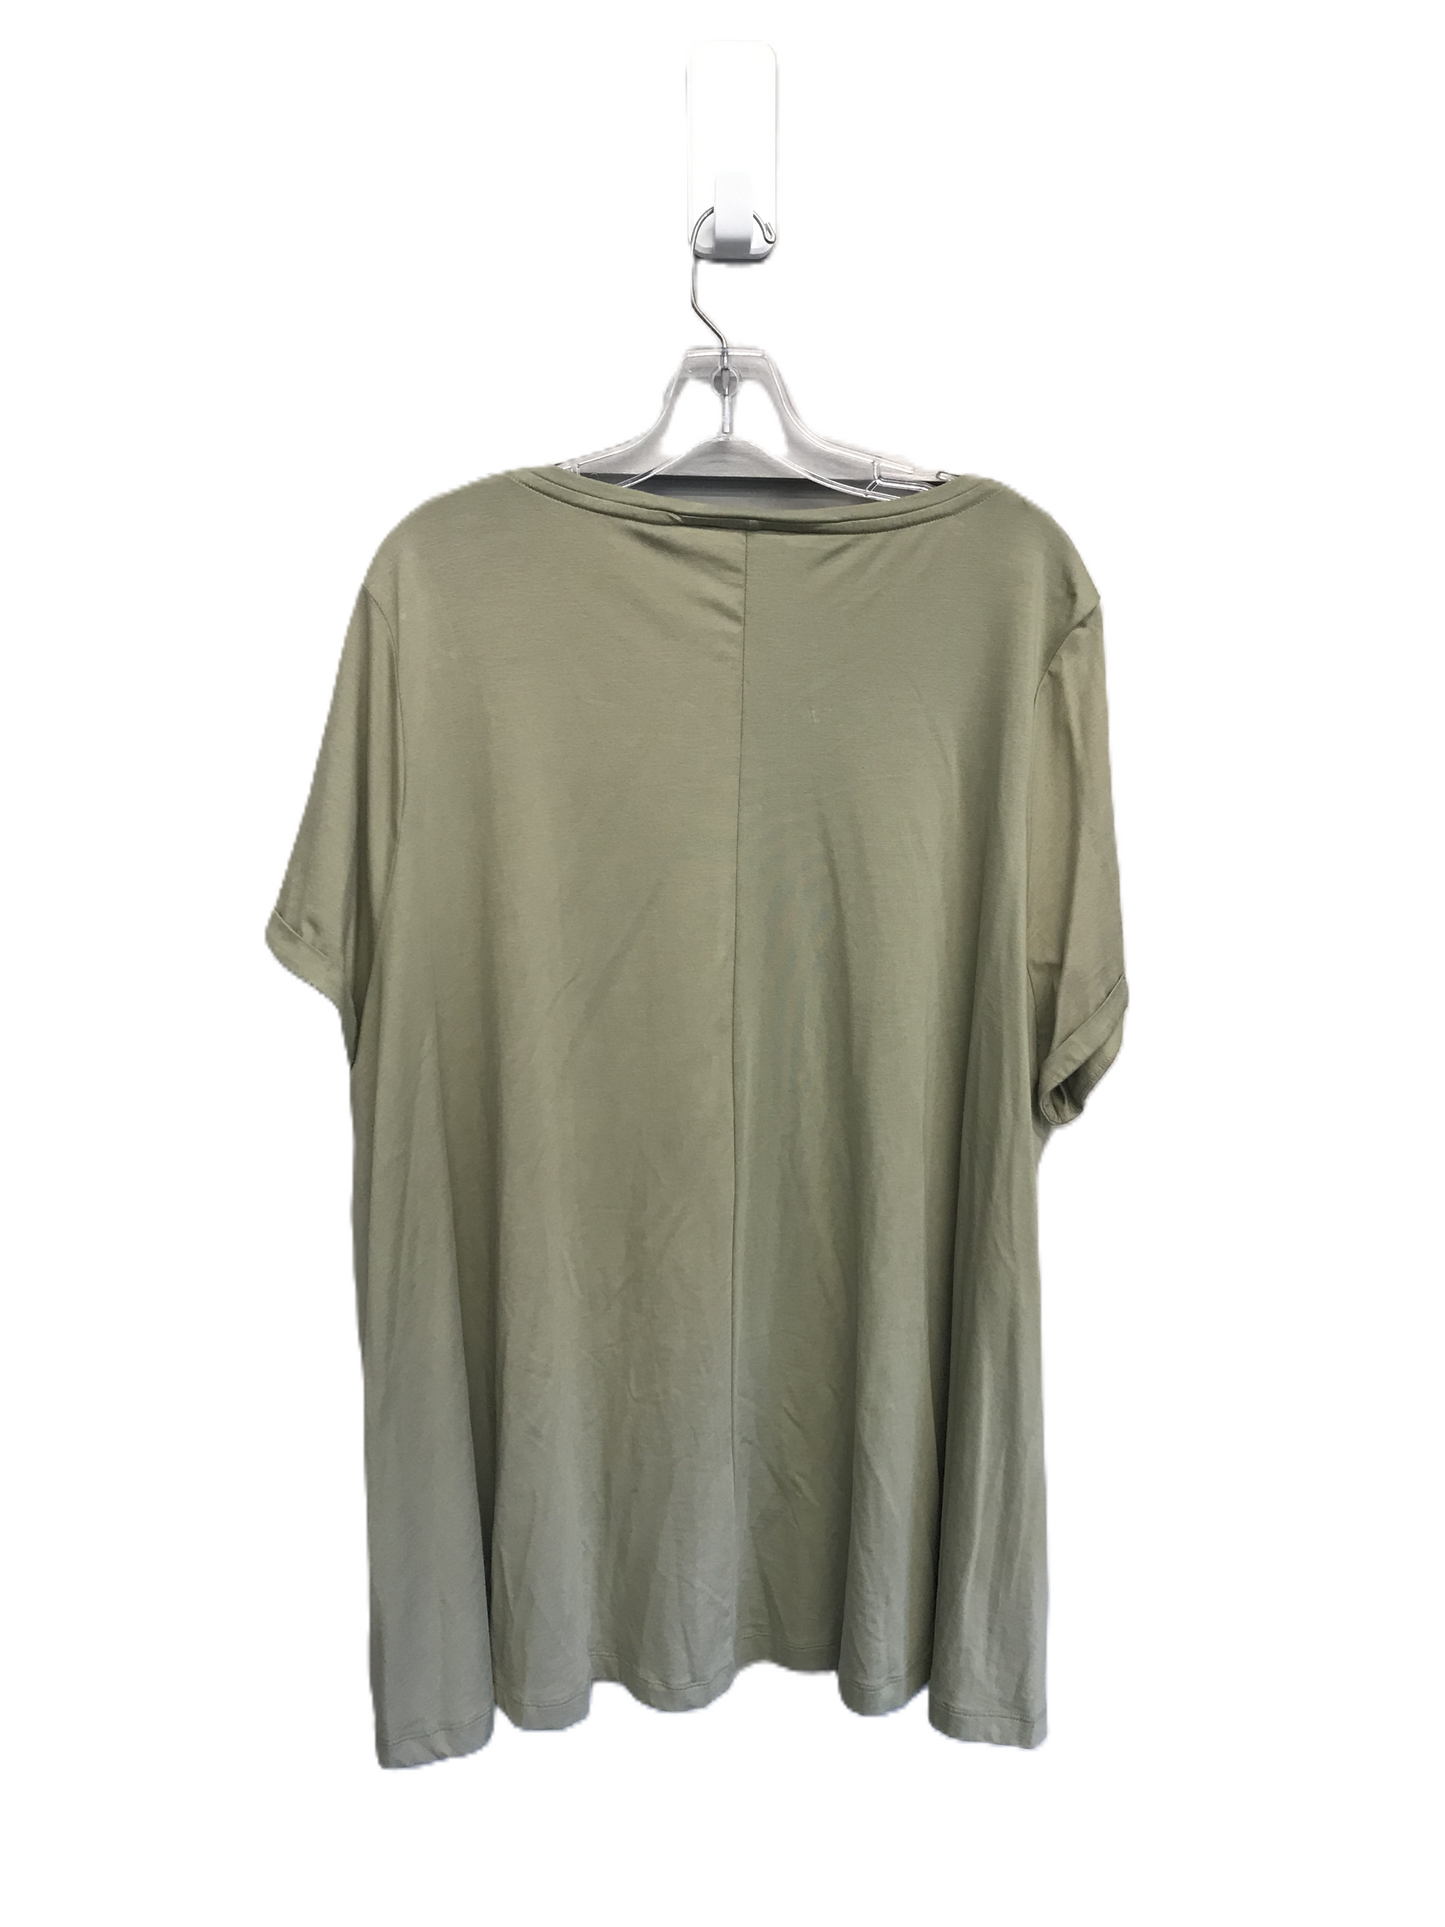 Green Top Short Sleeve Basic By Lands End, Size: 3x